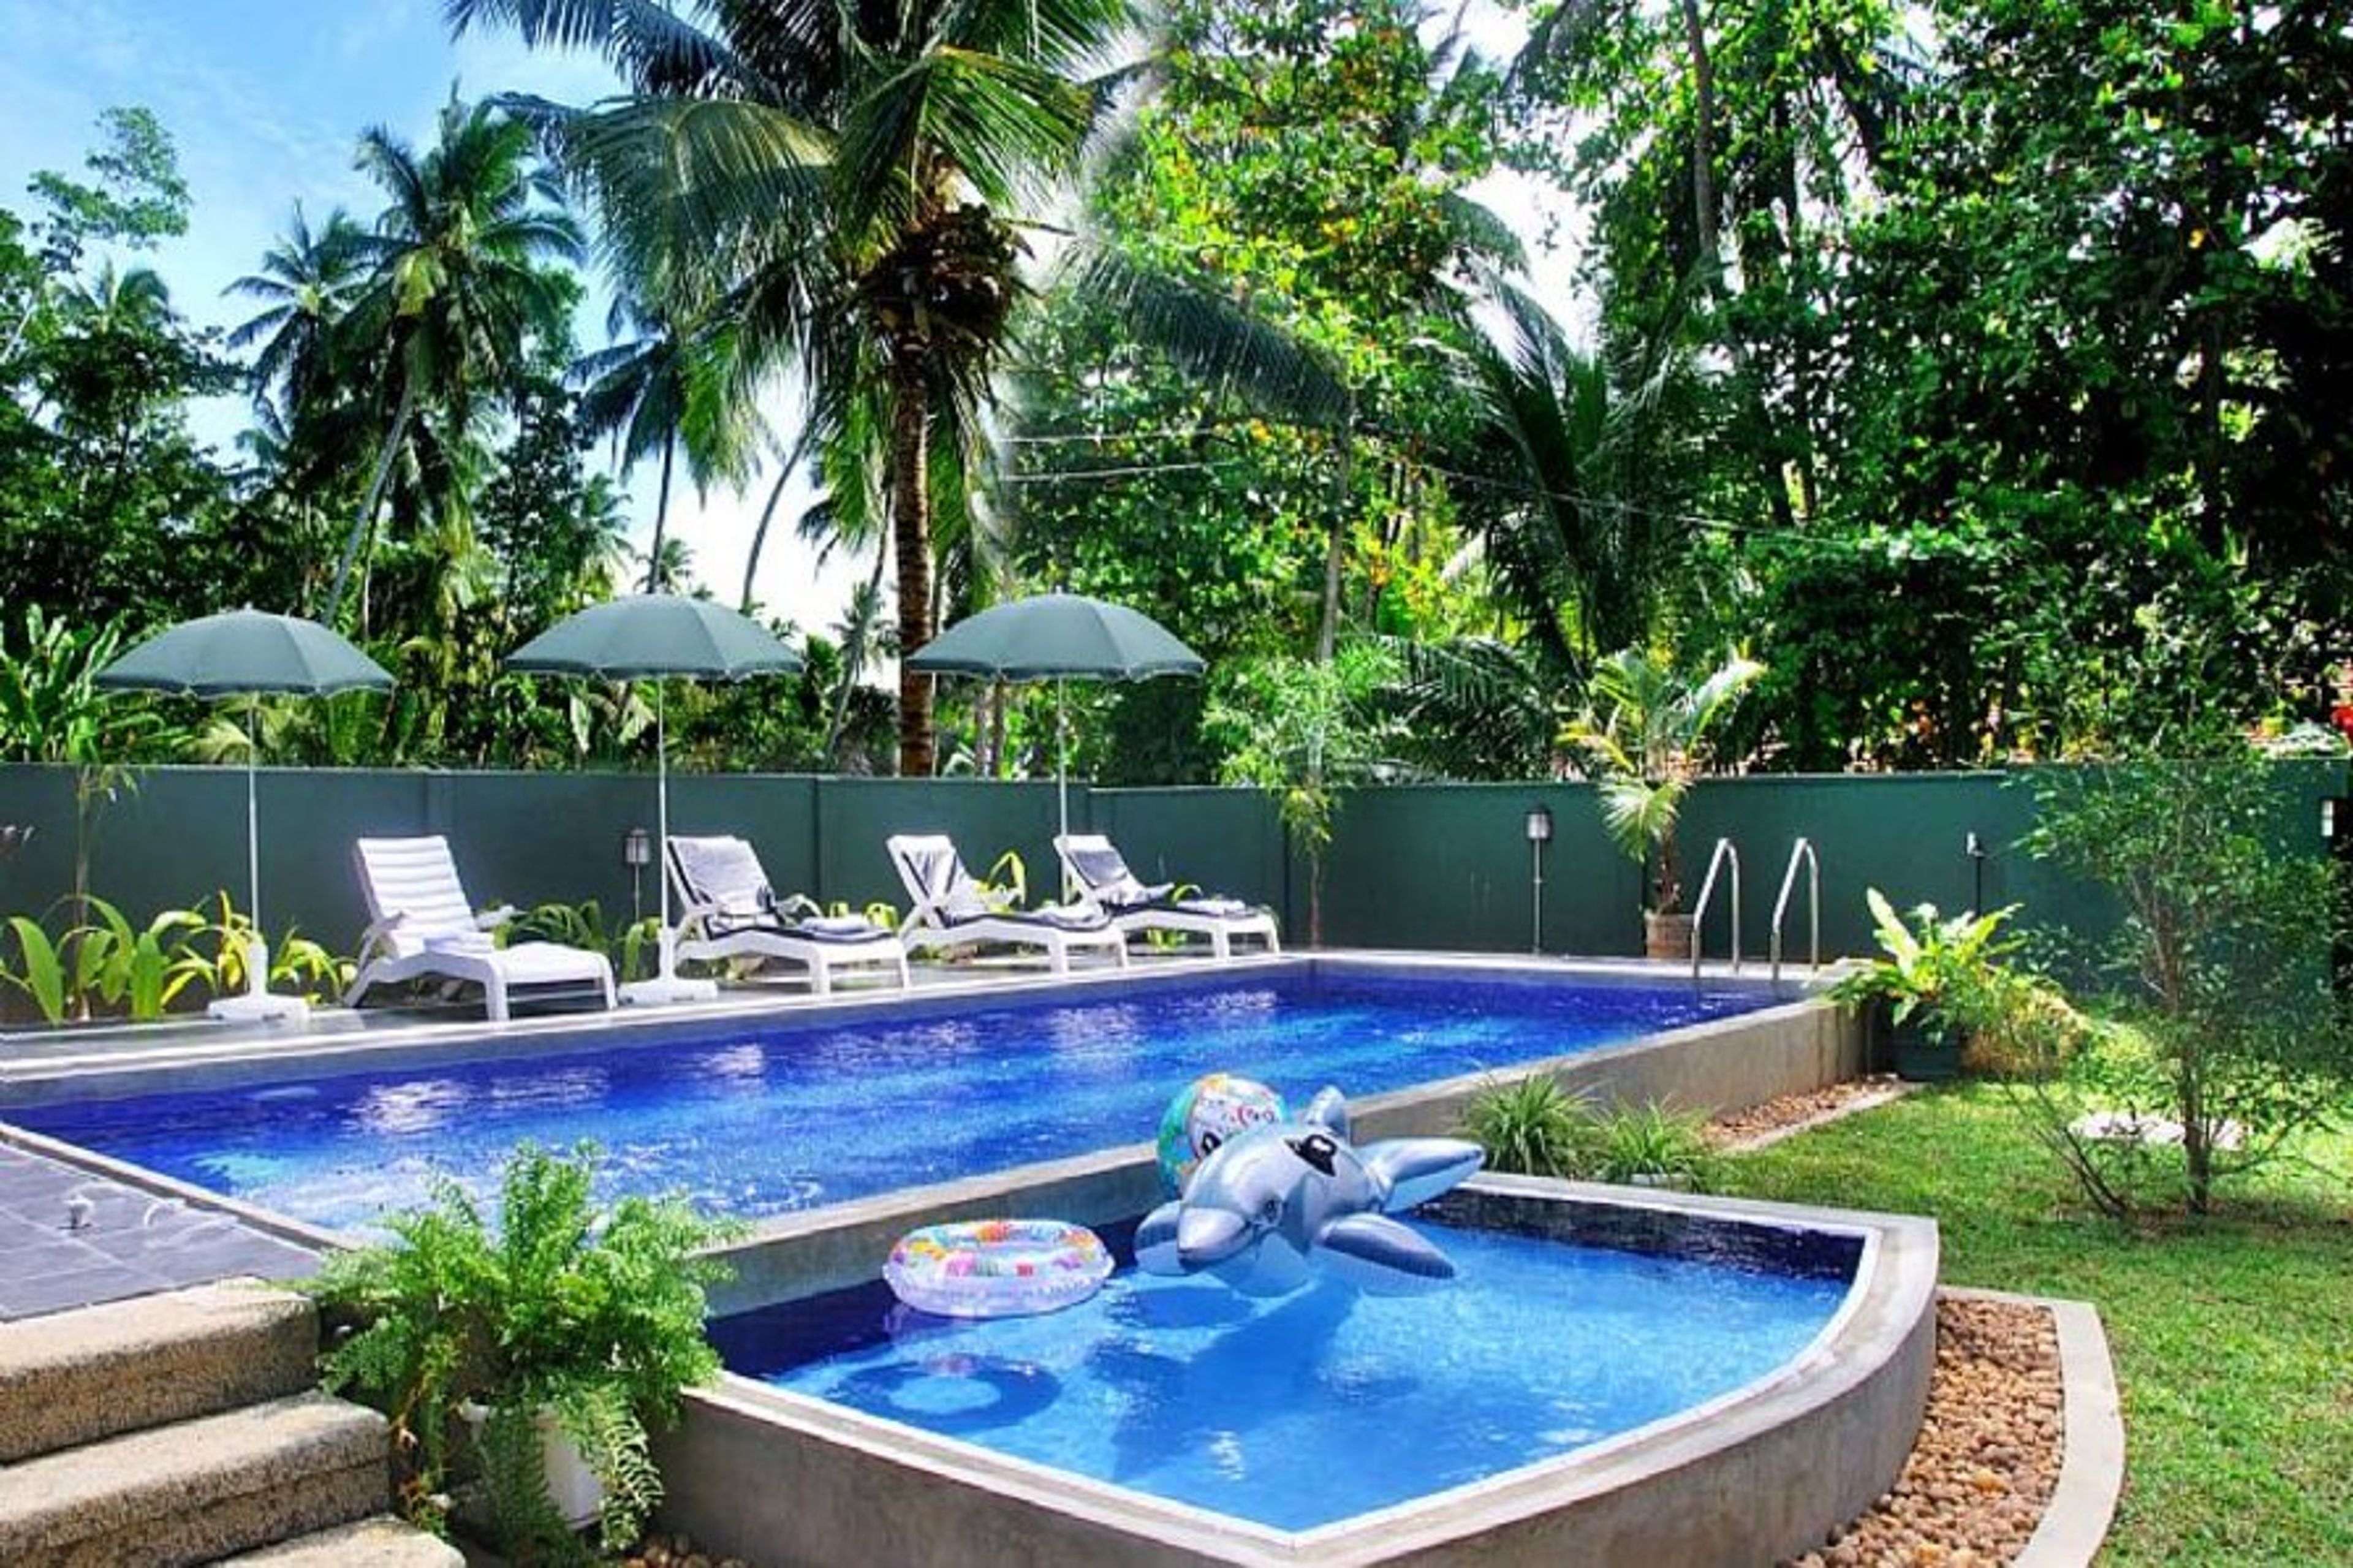 This is your private swimming pool with sunbeds